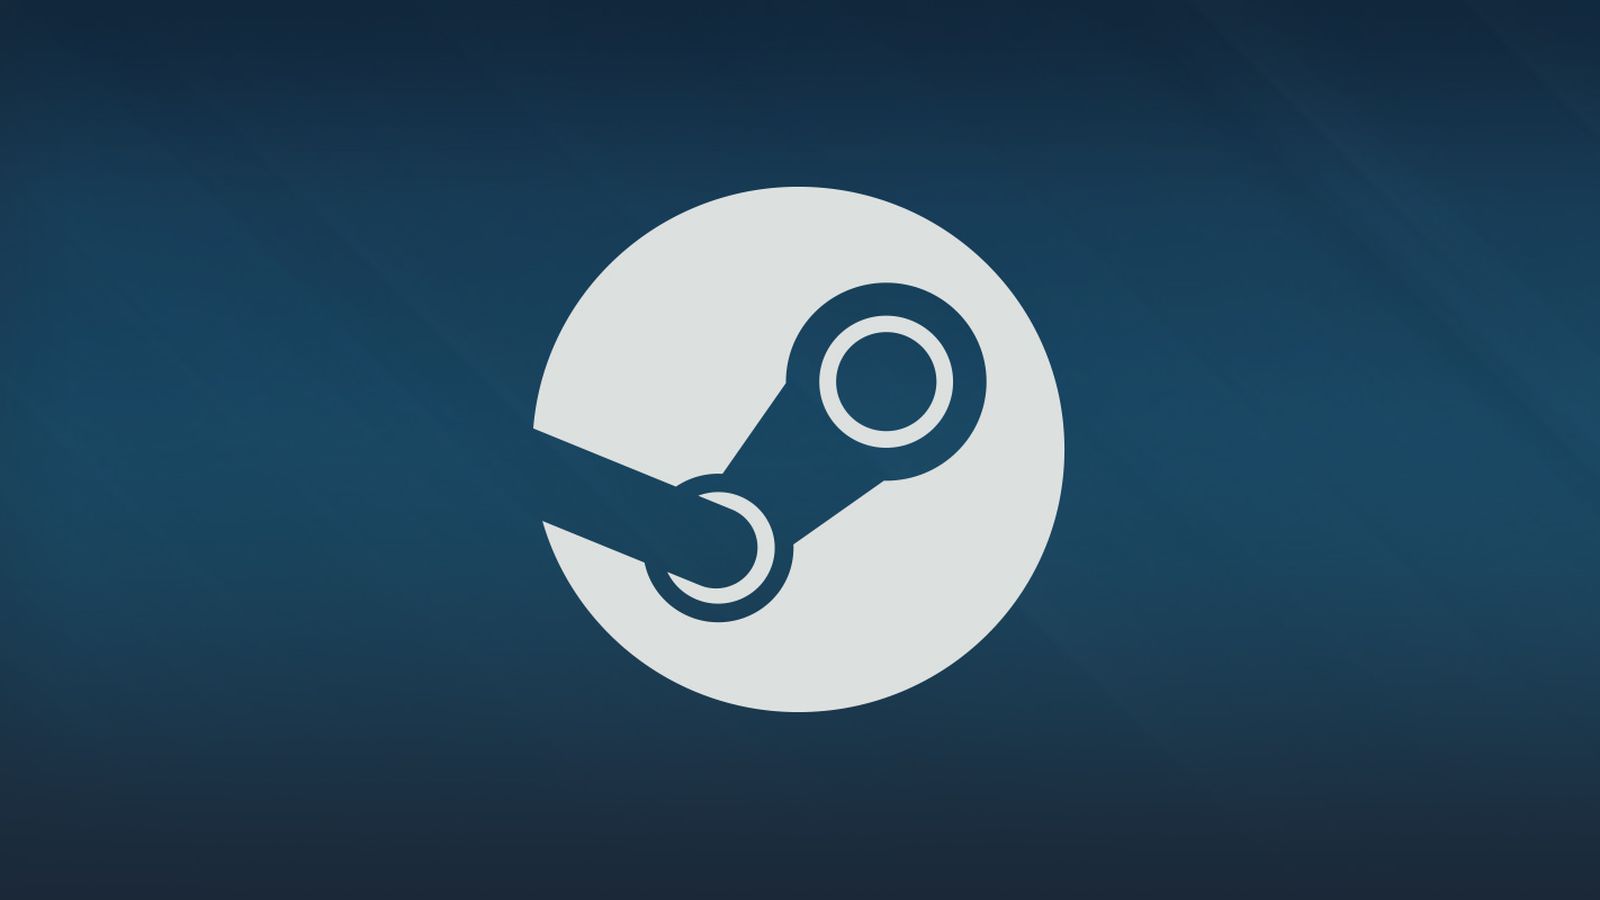 Image for Steam adds more granular ways to browse the store